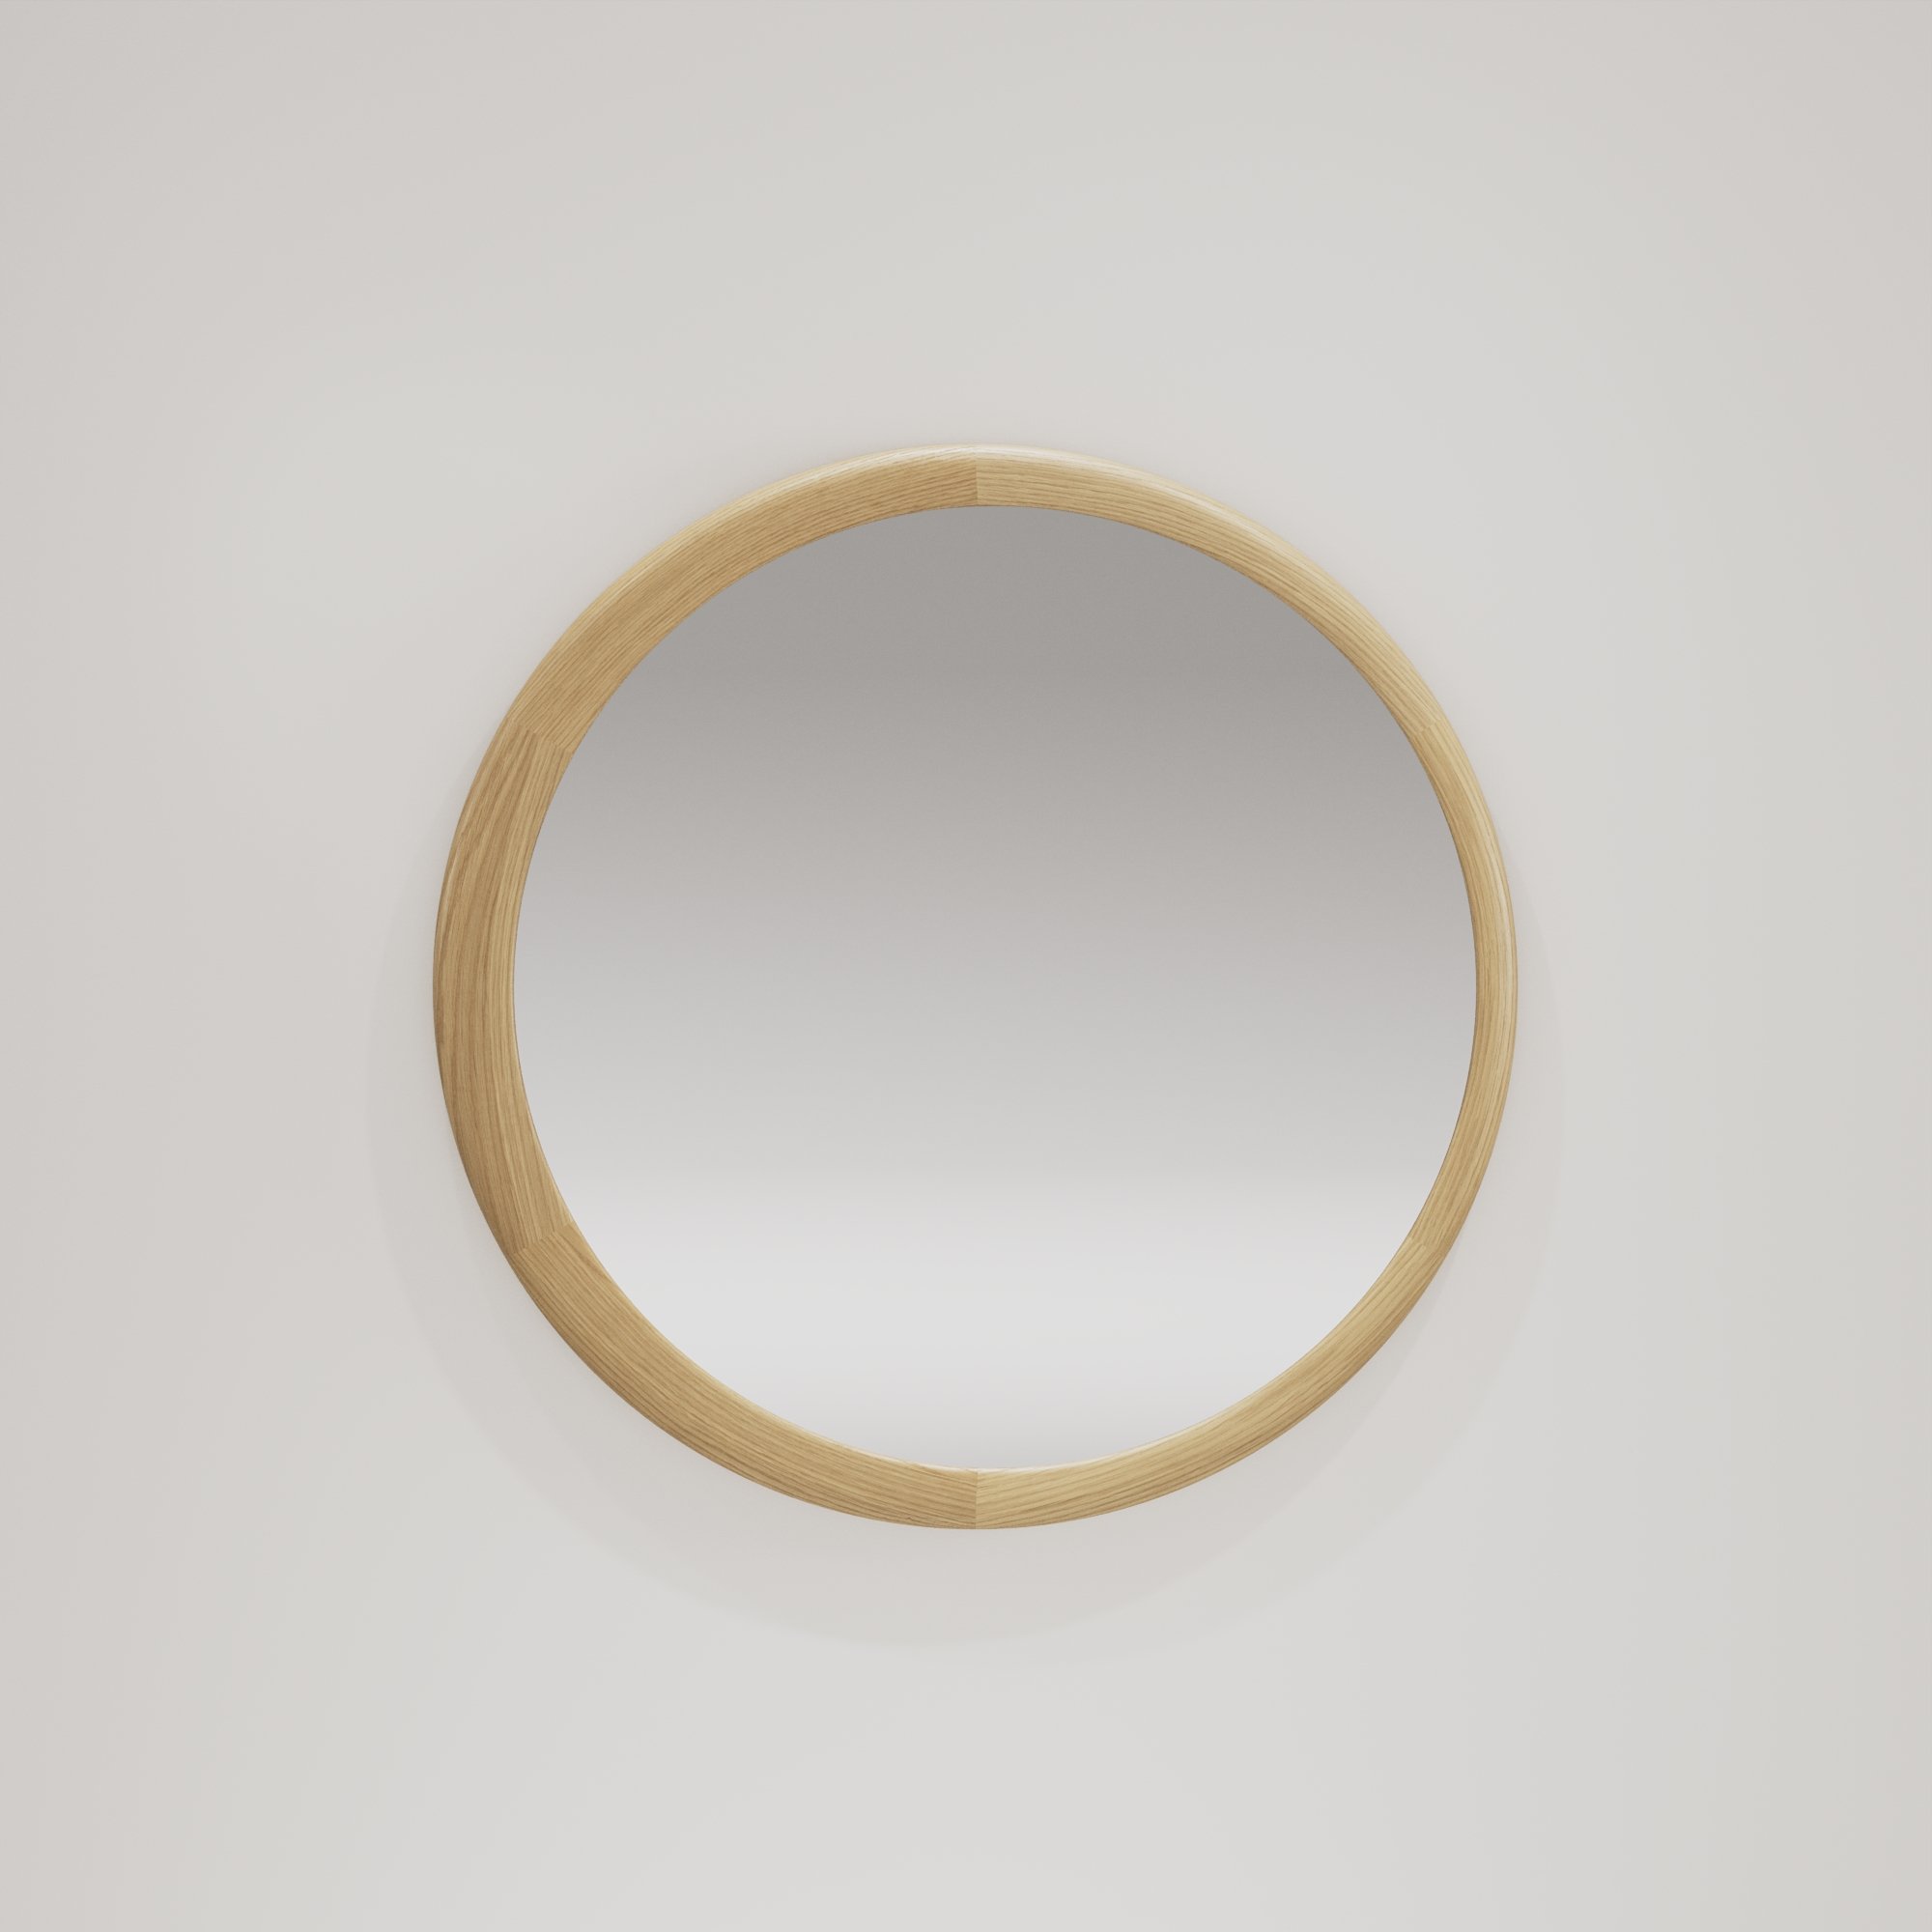 Luna Mirrors | Wewood - Portuguese Joinery